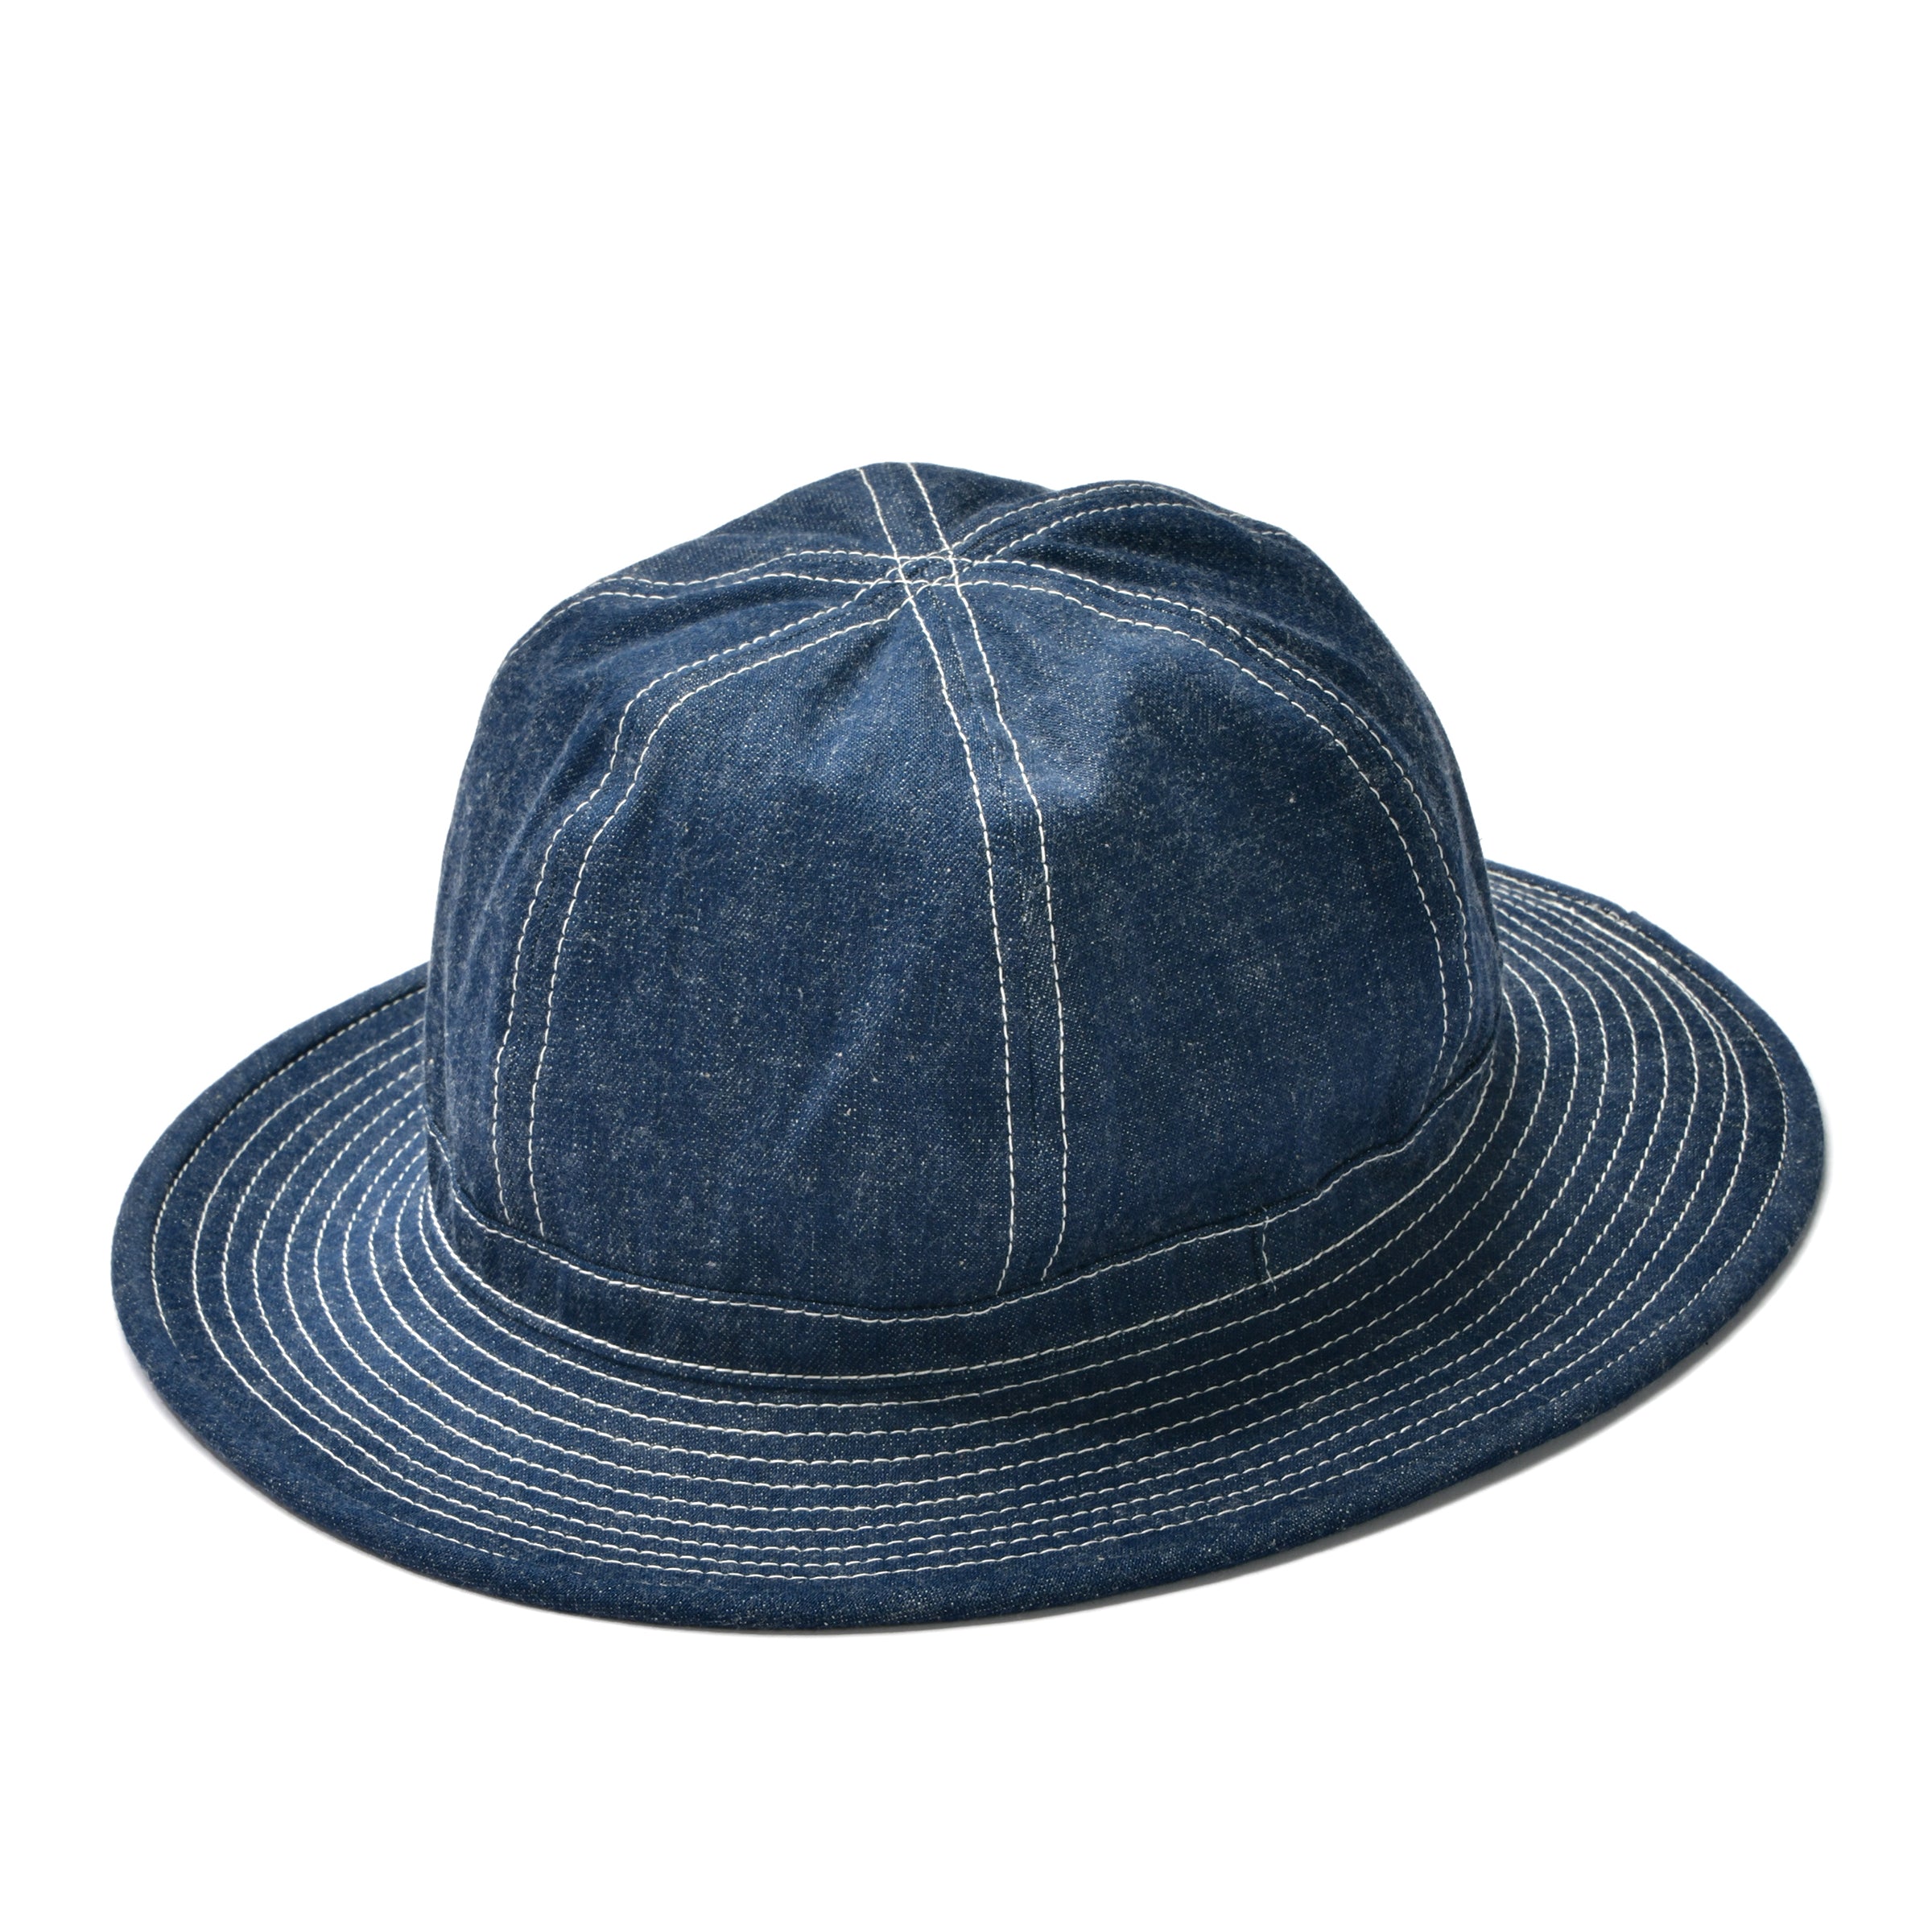 HAT, WORKING, DENIM, BLUE – The Real McCoy's